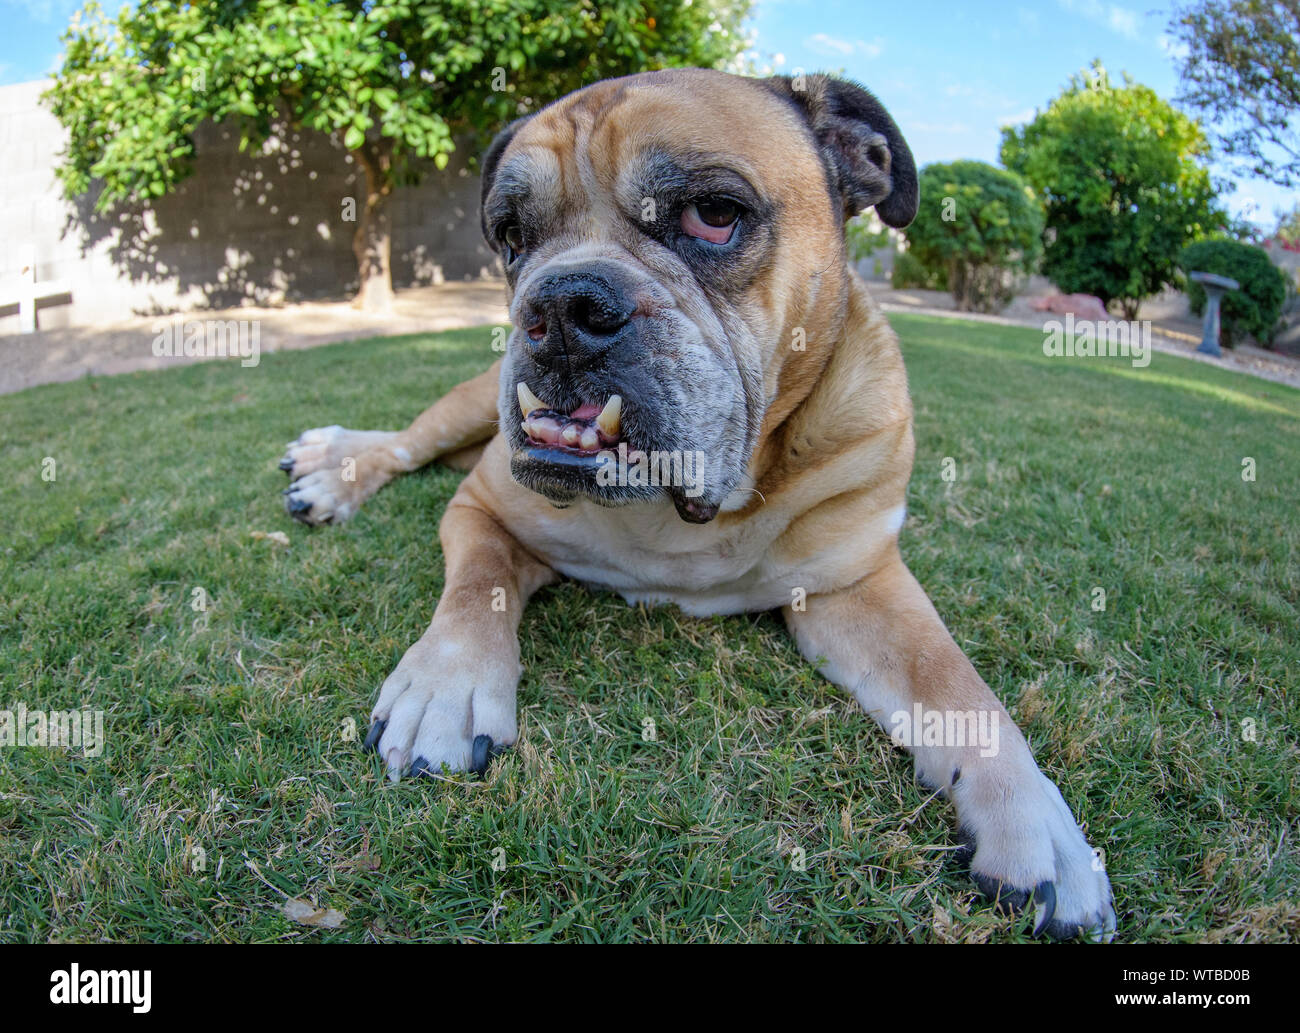 Up close with a bulldog on the grass with a fish eye lens Stock Photo